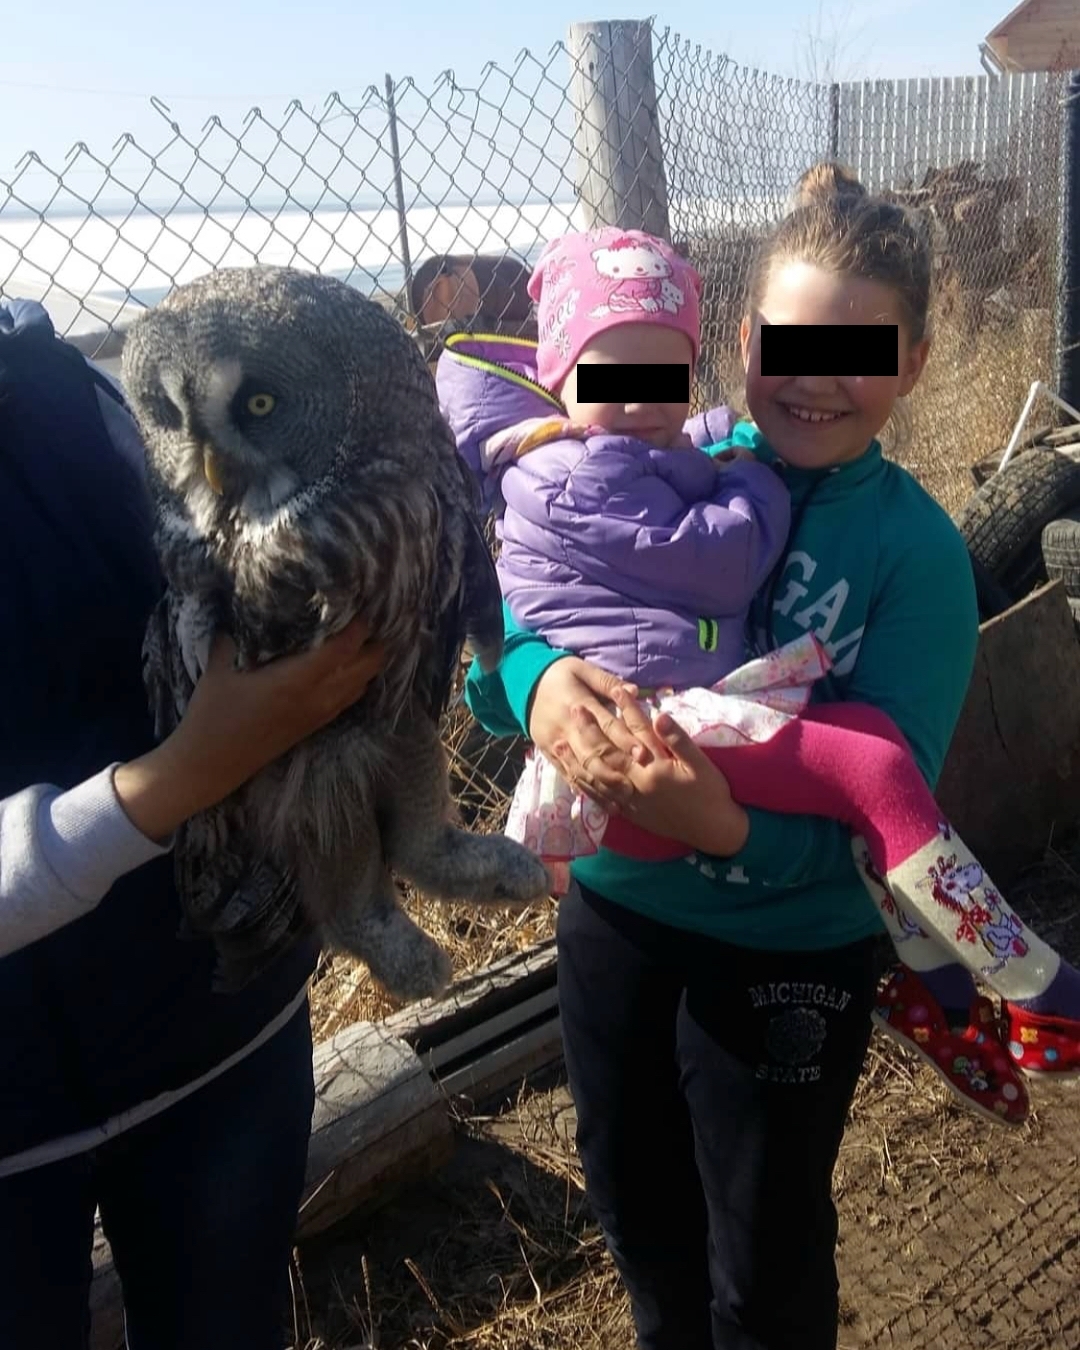 In the morning we woke up screaming, did not understand what it was ?! - Yakutia, Animal Rescue, Children, Orto Doidu Zoo, The photo, Longpost